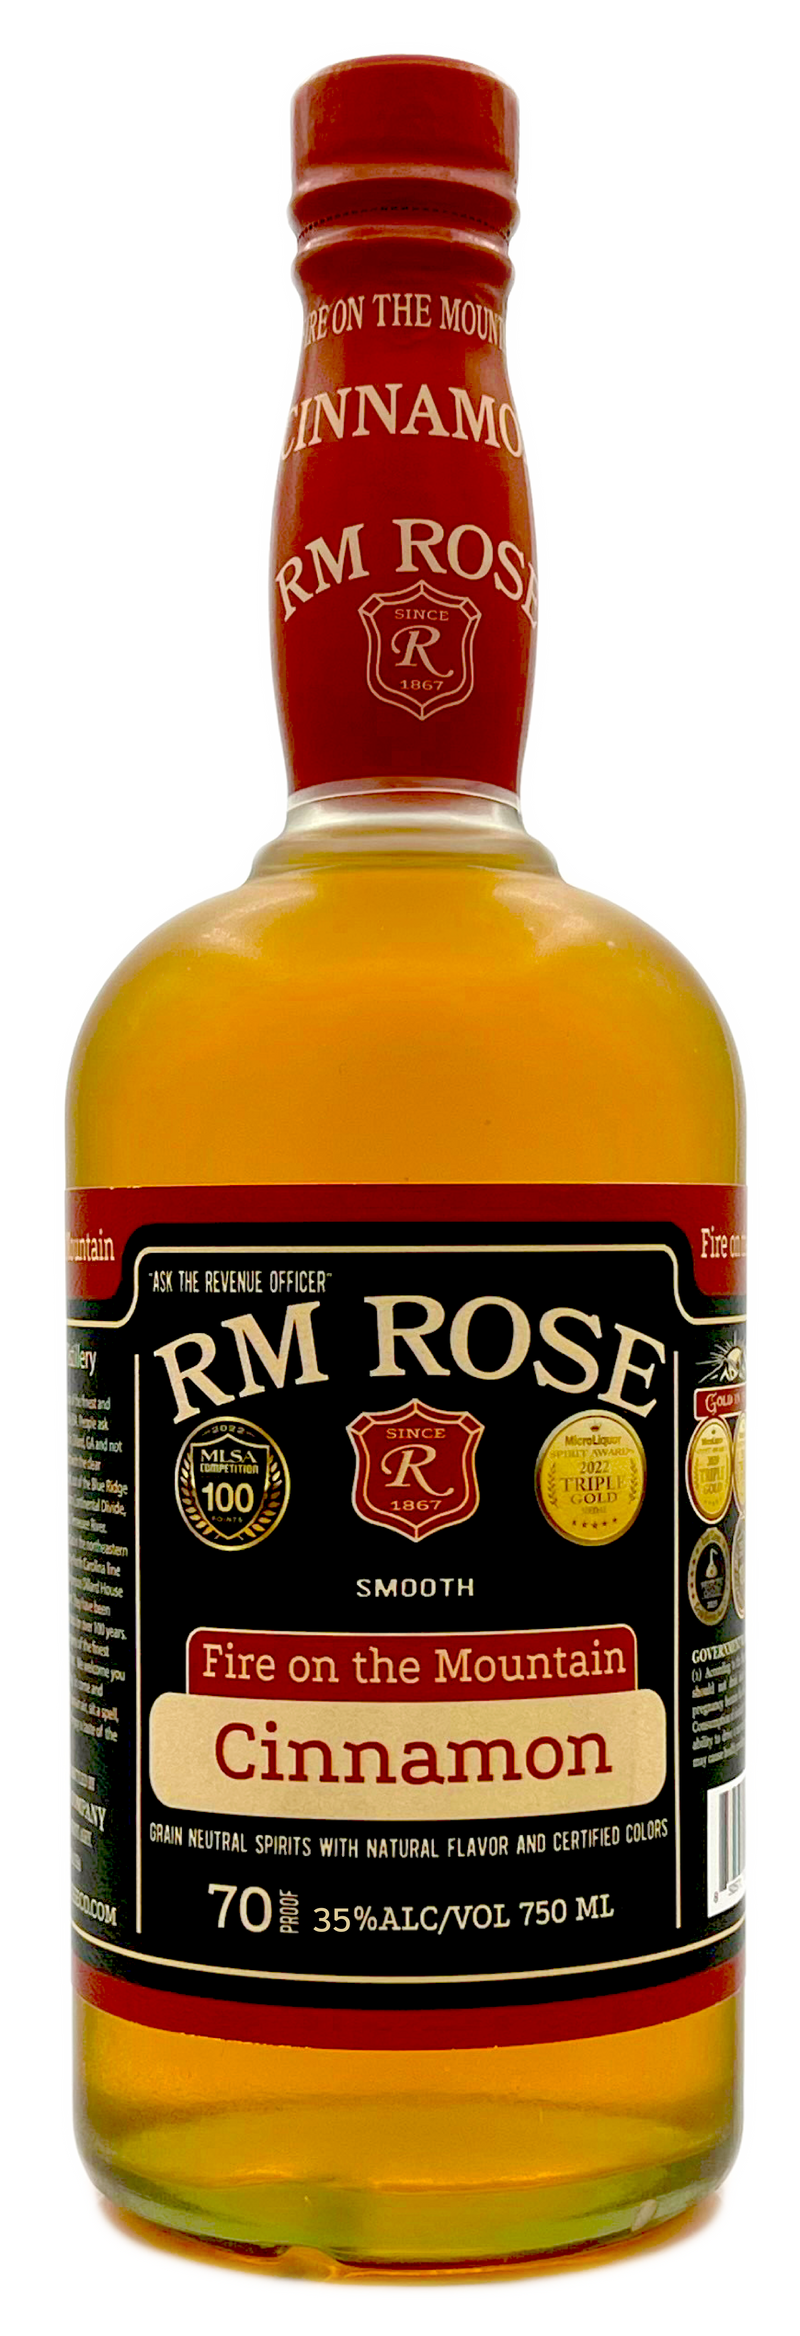 RM Rose Fire on the Mountain Cinnamon Whikey